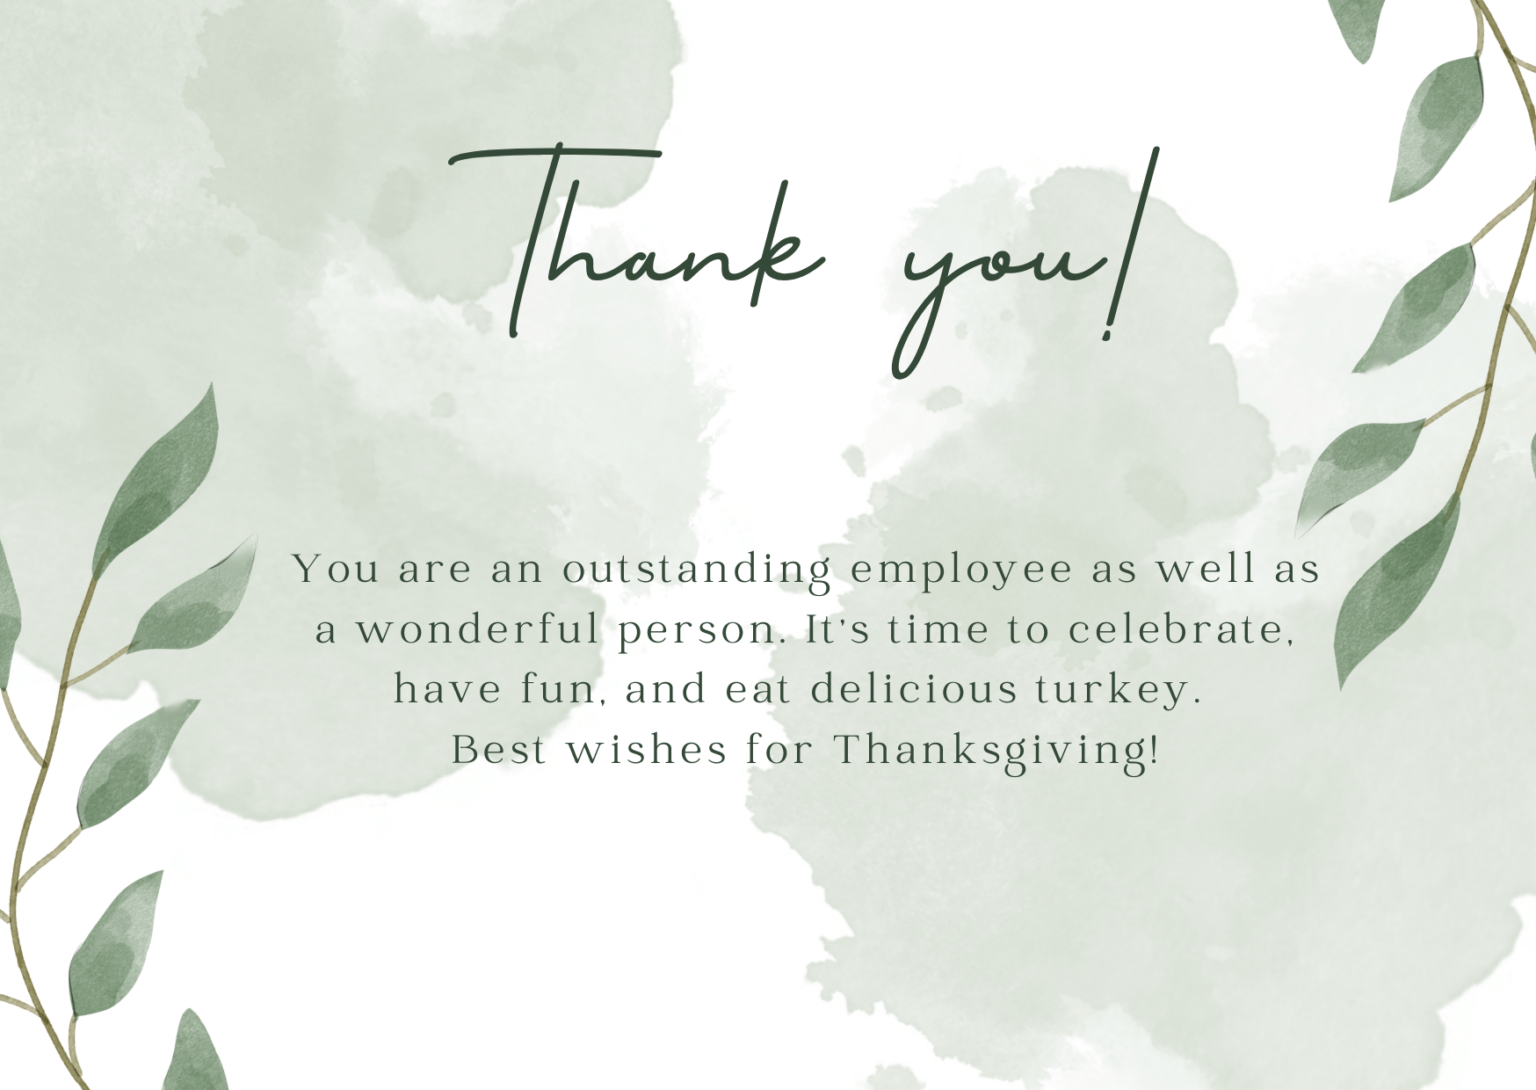 Thanksgiving Messages & Wishes for Employees In 2022 - Traicie